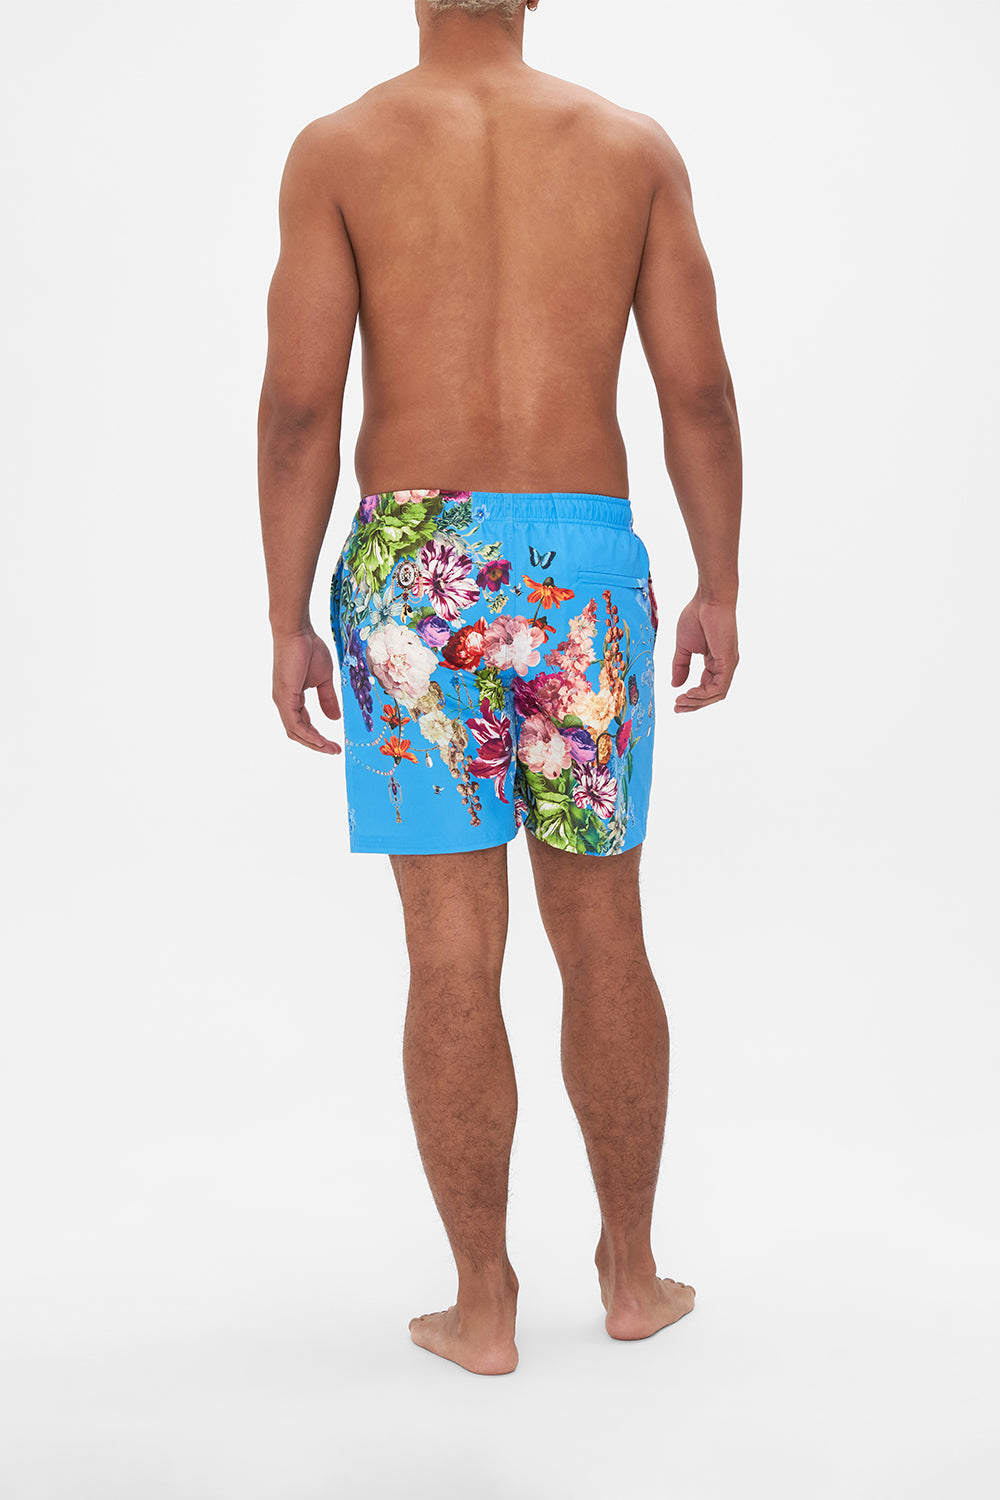 Hotel Fransk by CAMILLA mens blue floral print boardshorts in Nectar Of The Gods print